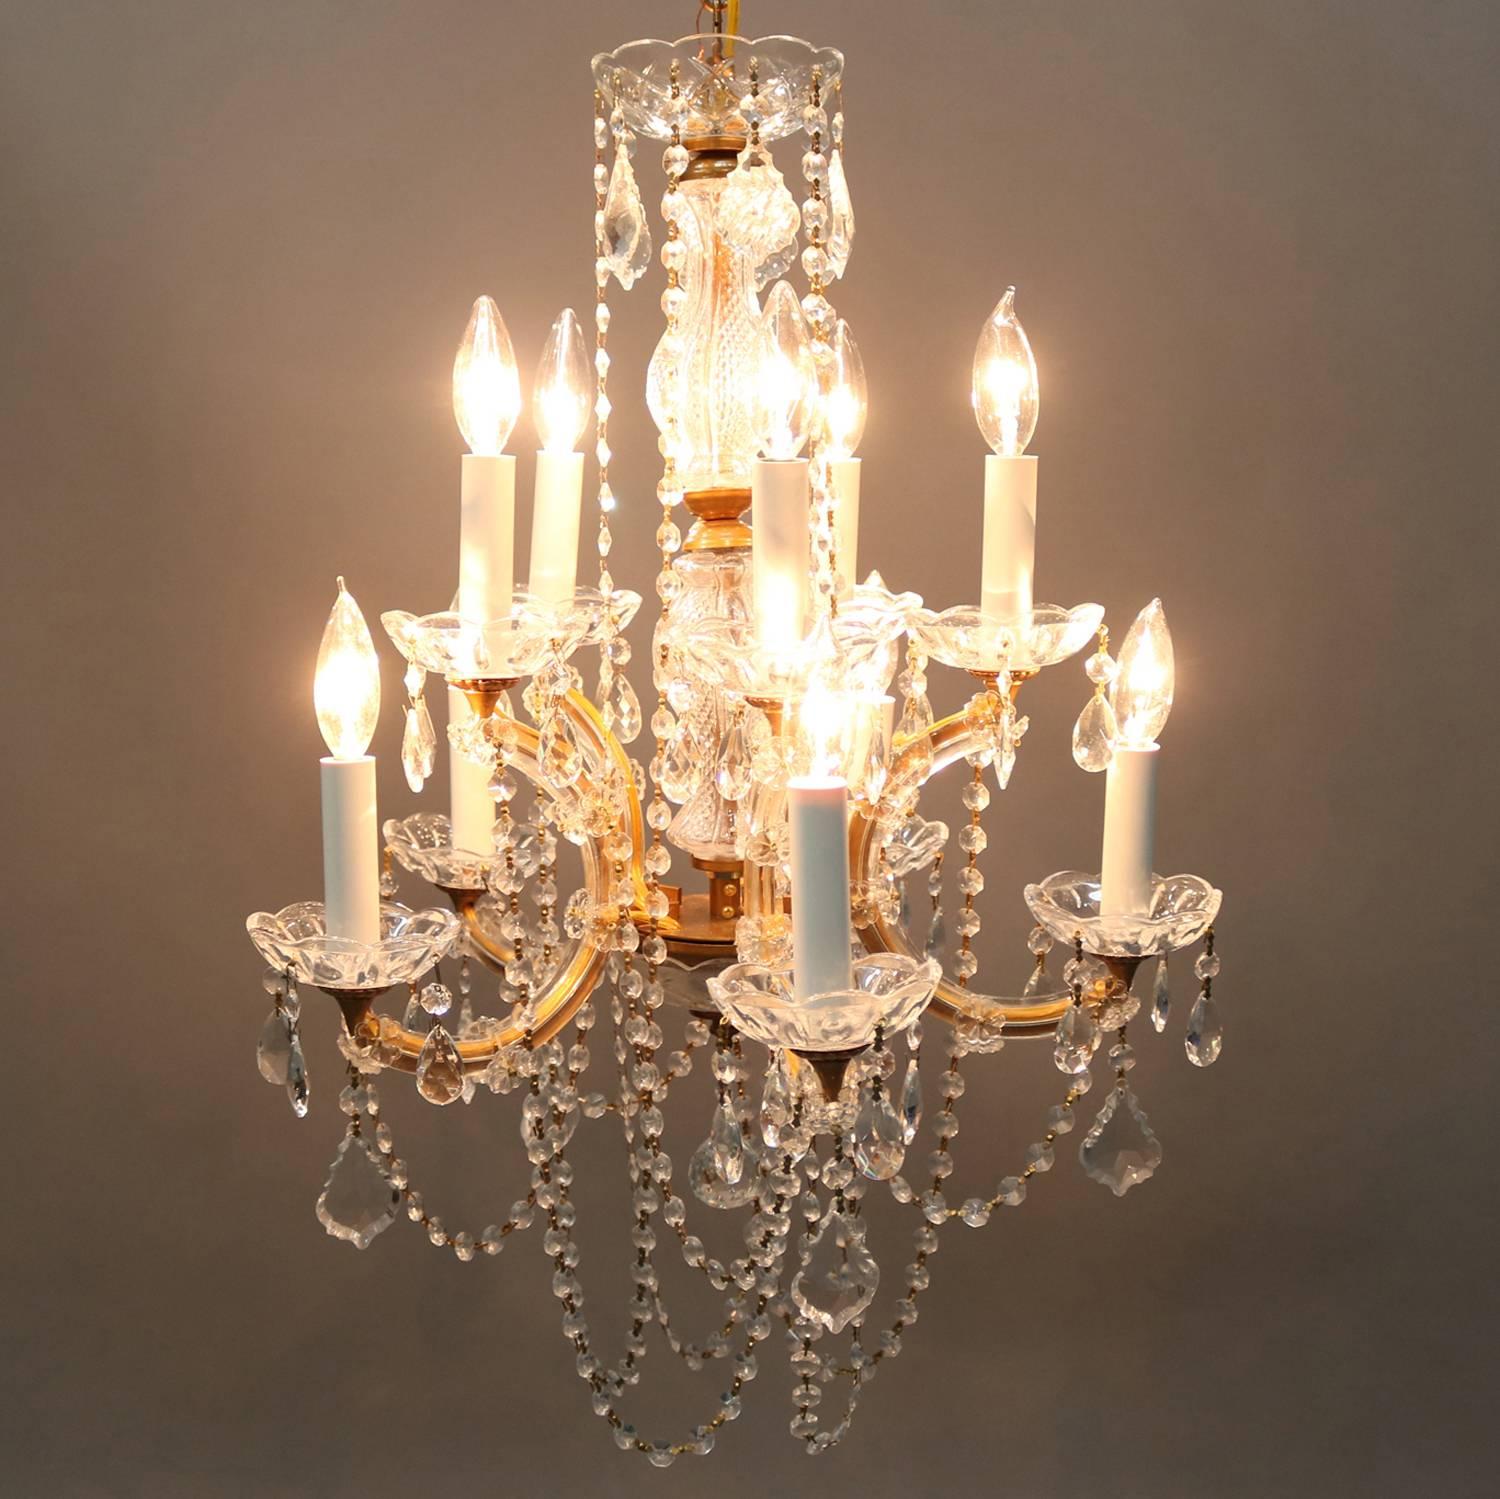 French crystal chandelier features gilt c-scroll form frame with ten lights decorated with hanging and strung cut crystals, 20th century

Measures - 52